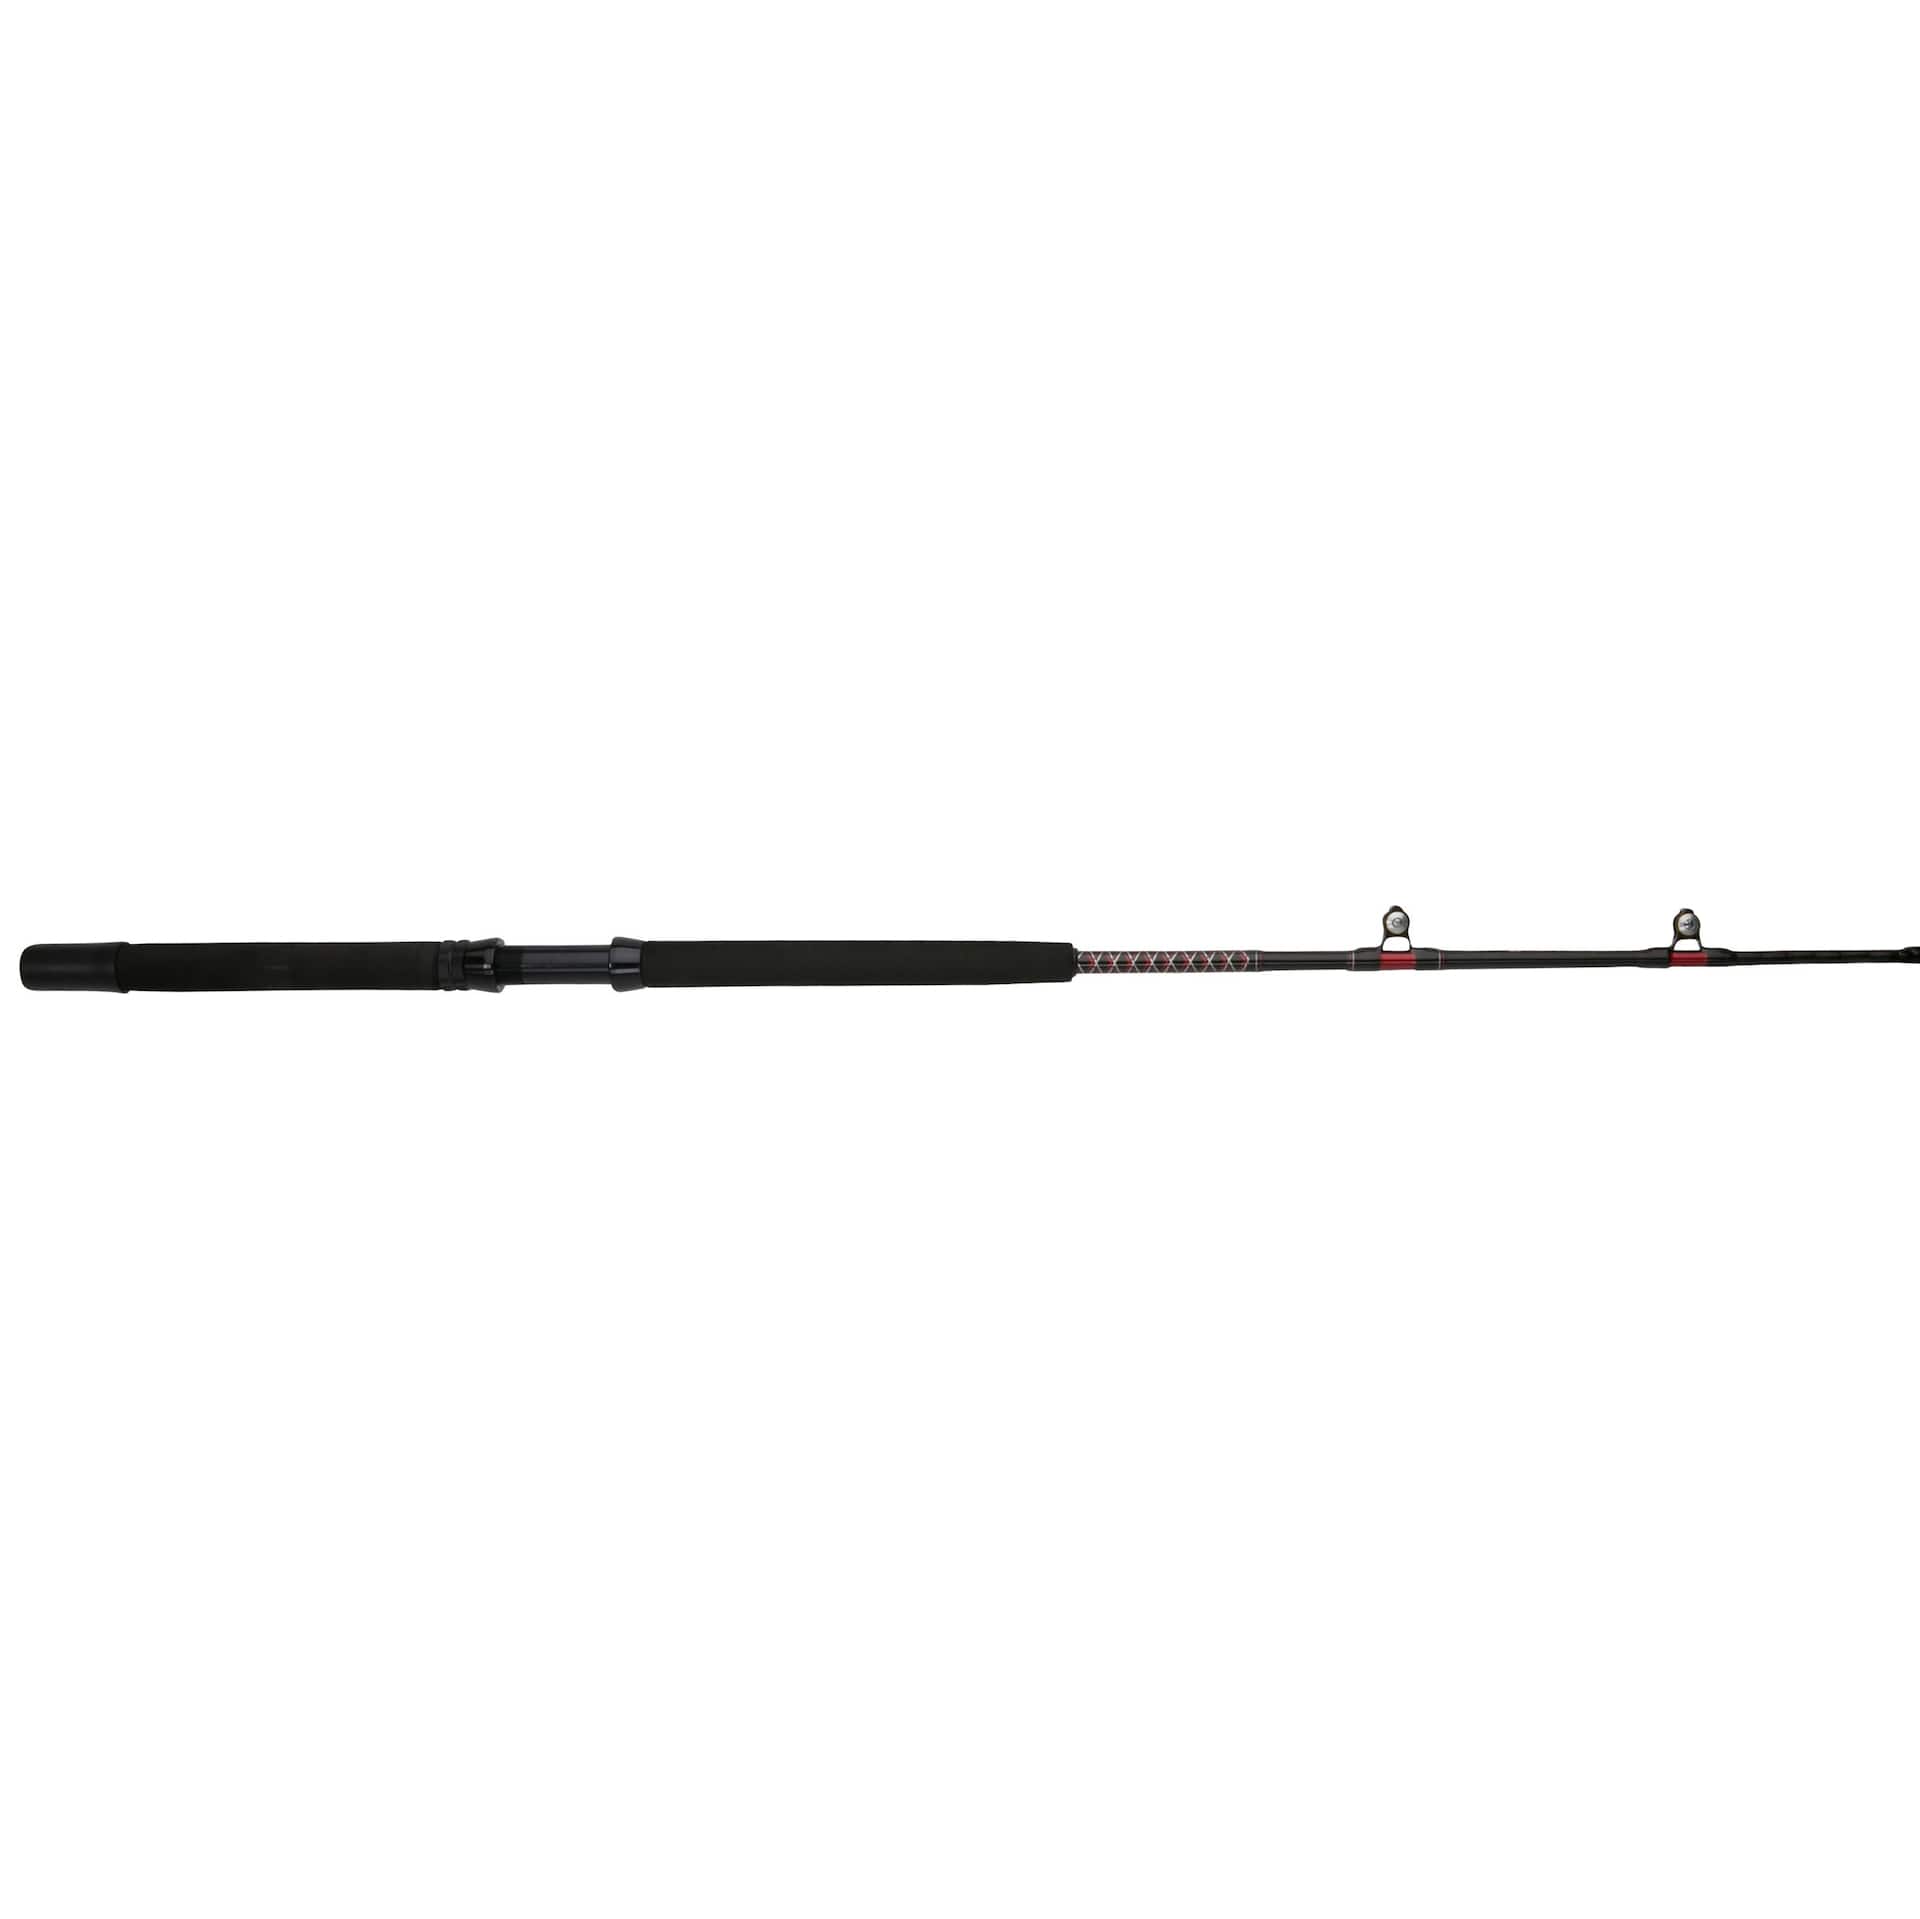 Ugly Stik GX2 Travel Spinning Fishing Rods, Collapsible/Foldable